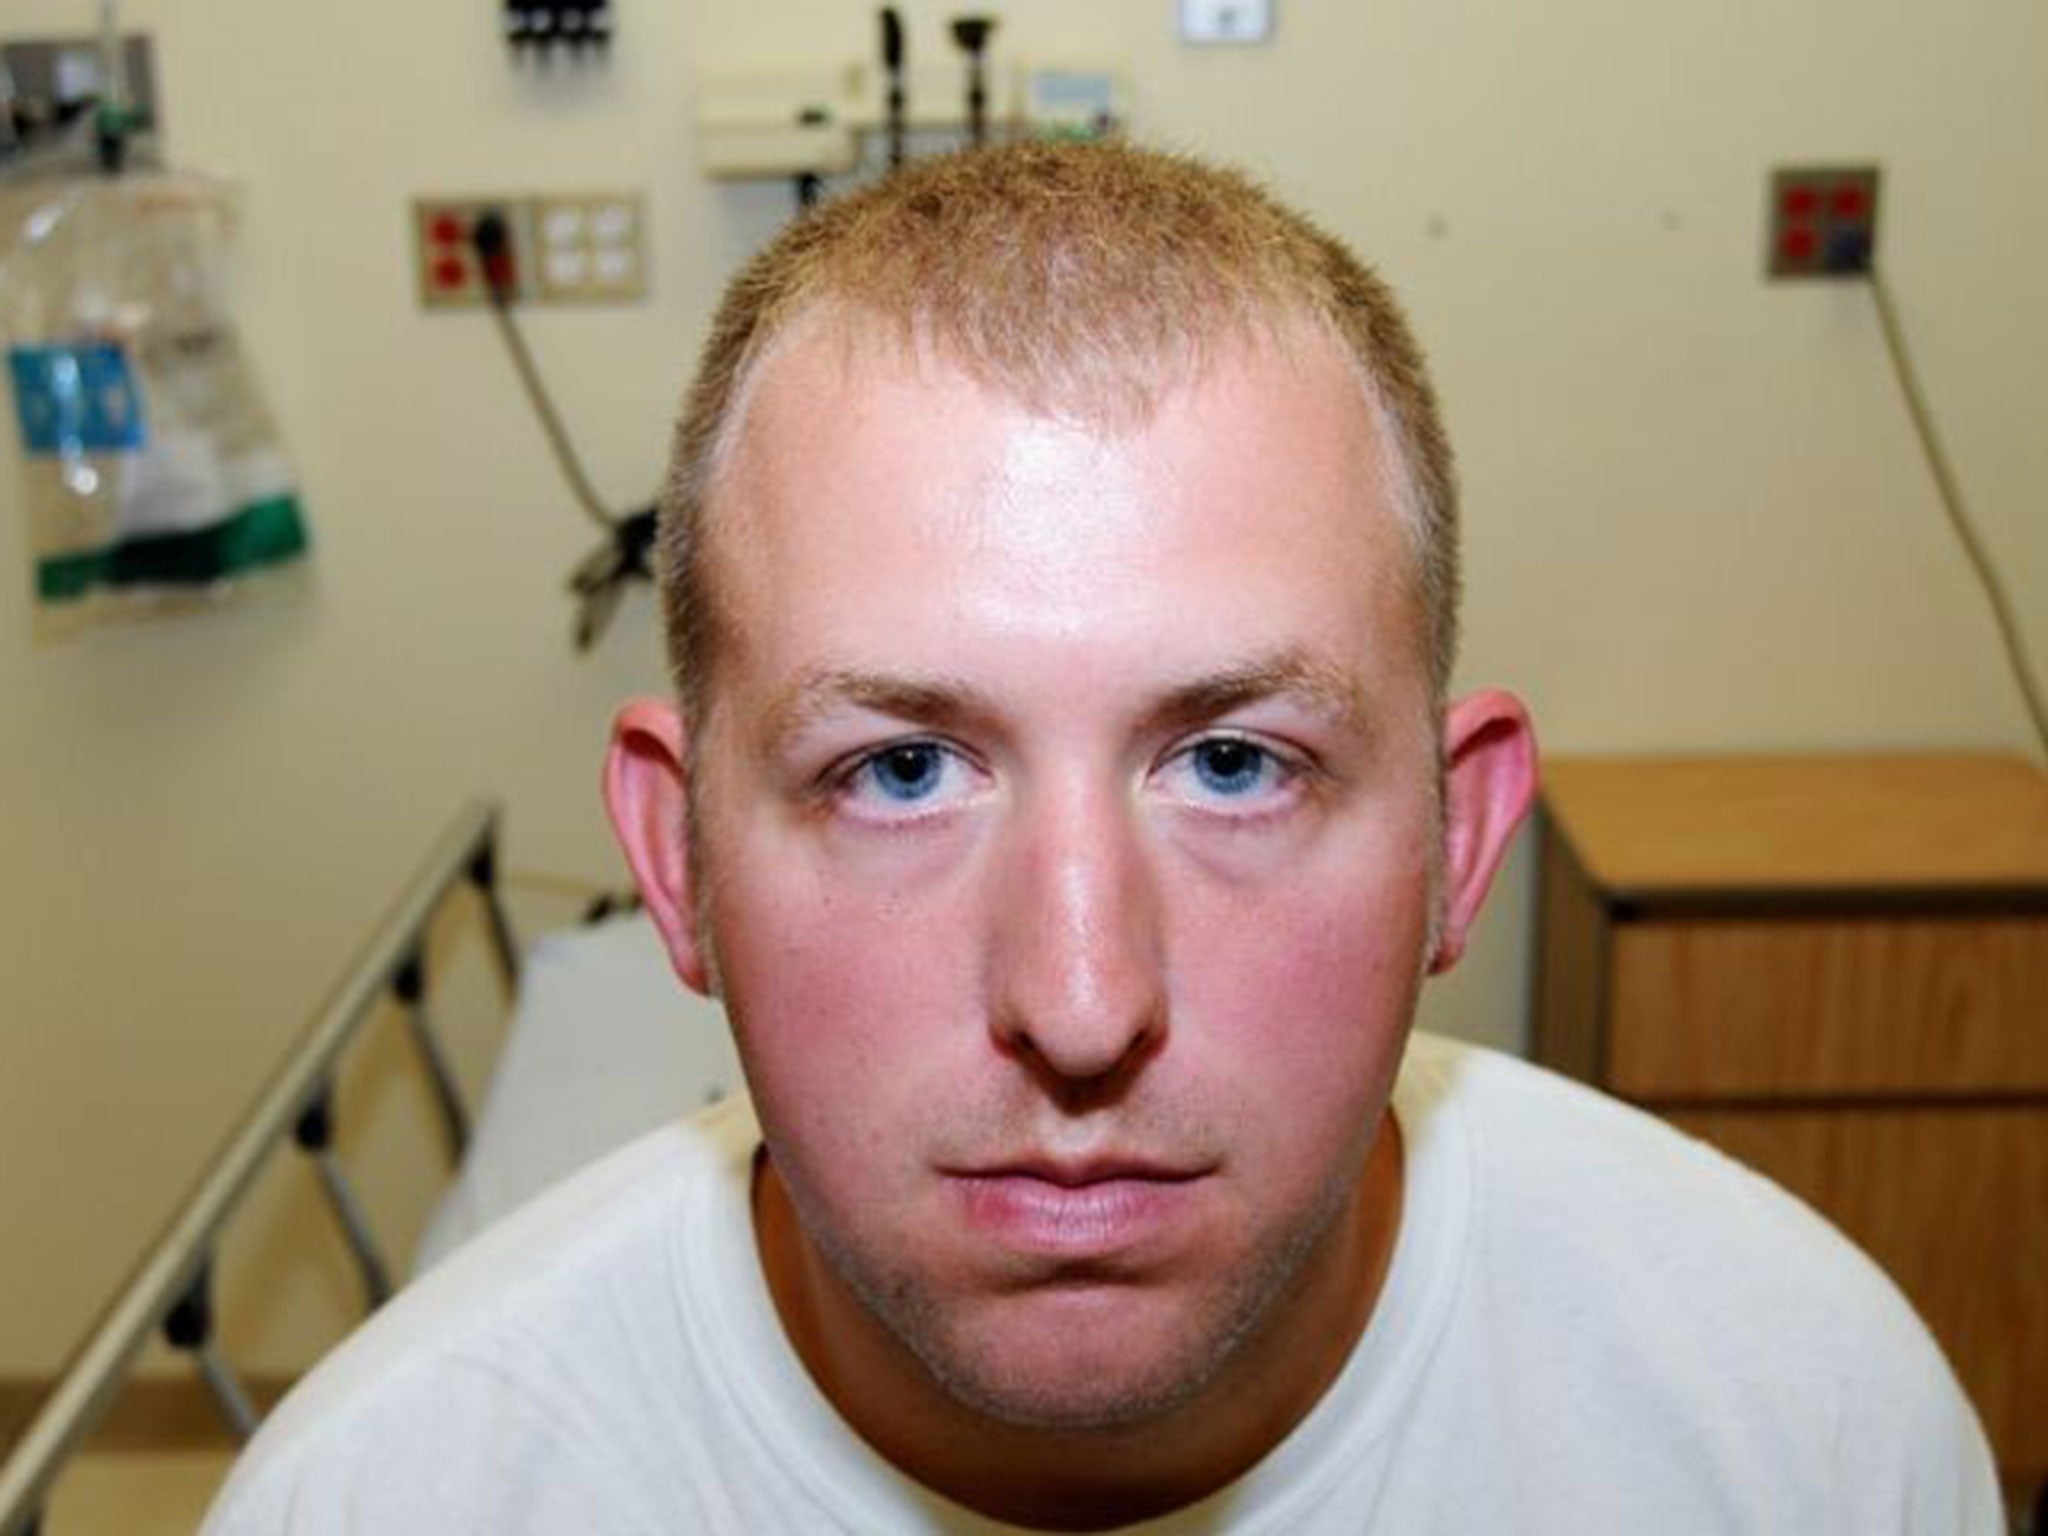 This photo released by the St. Louis County Prosecuting Attorney's office on Monday 24 November, 2014, shows Ferguson police officer Darren Wilson during his medical examination after he fatally shot Michael Brown in Ferguson, Missouri